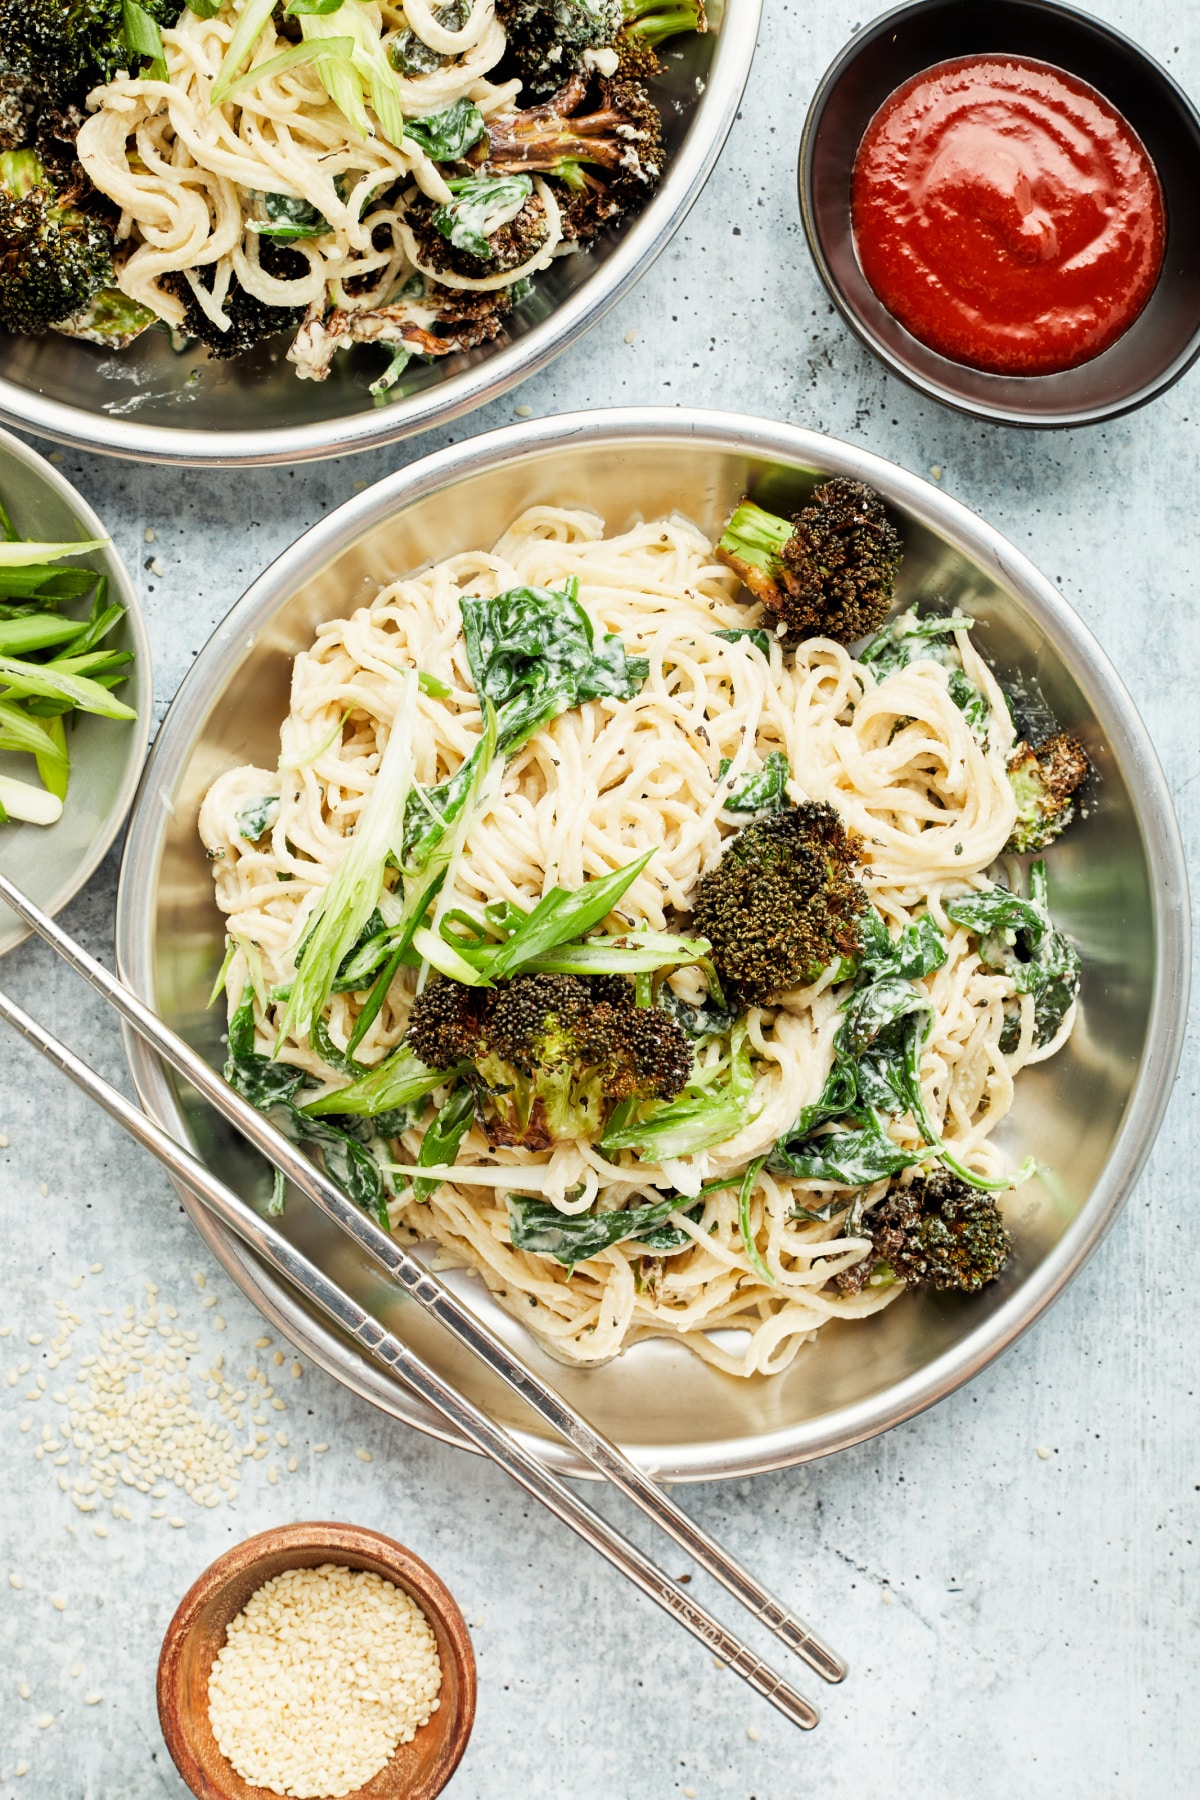 Overhead view of two bowls of ginger sesame noodles with roasted broccoli. A set of silver chopsticks lays across one bowl, and small bowls of sriracha sauce and sesame seeds sit to the side of the noodle bowls.